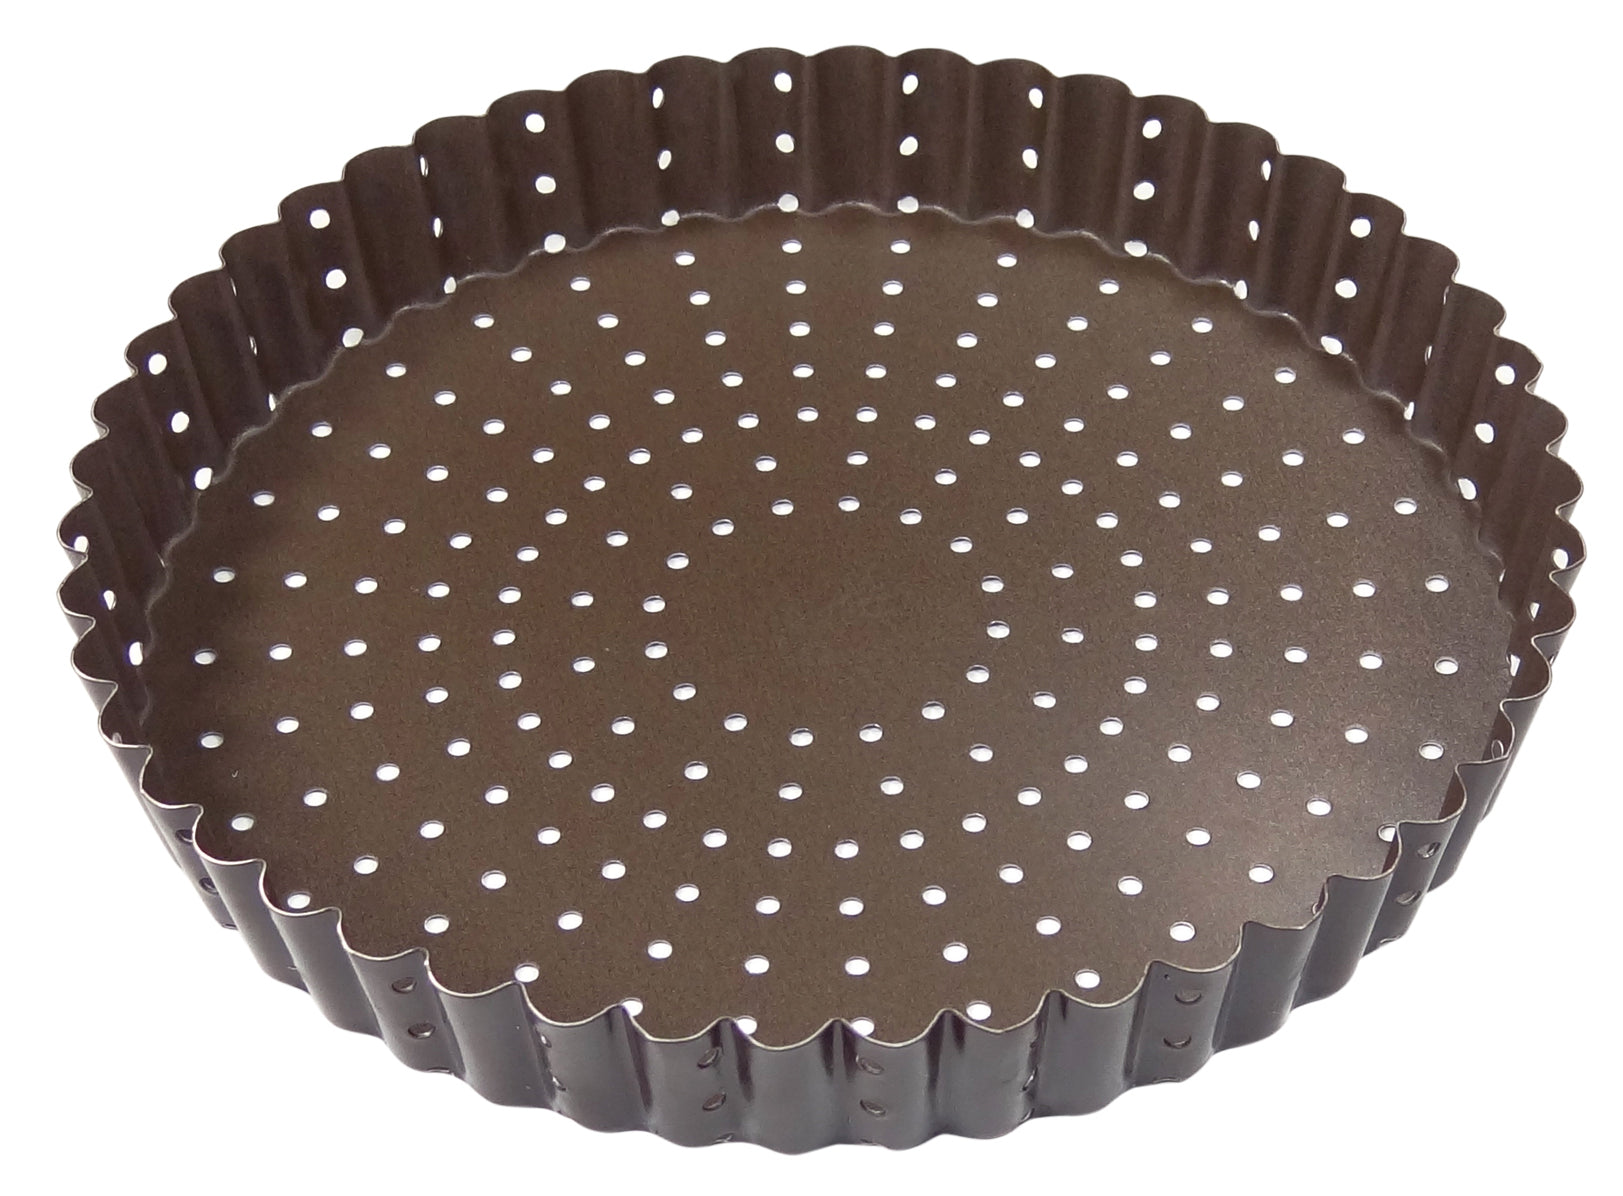 Picture of Gobel Perforated fluted tart mold | 226321